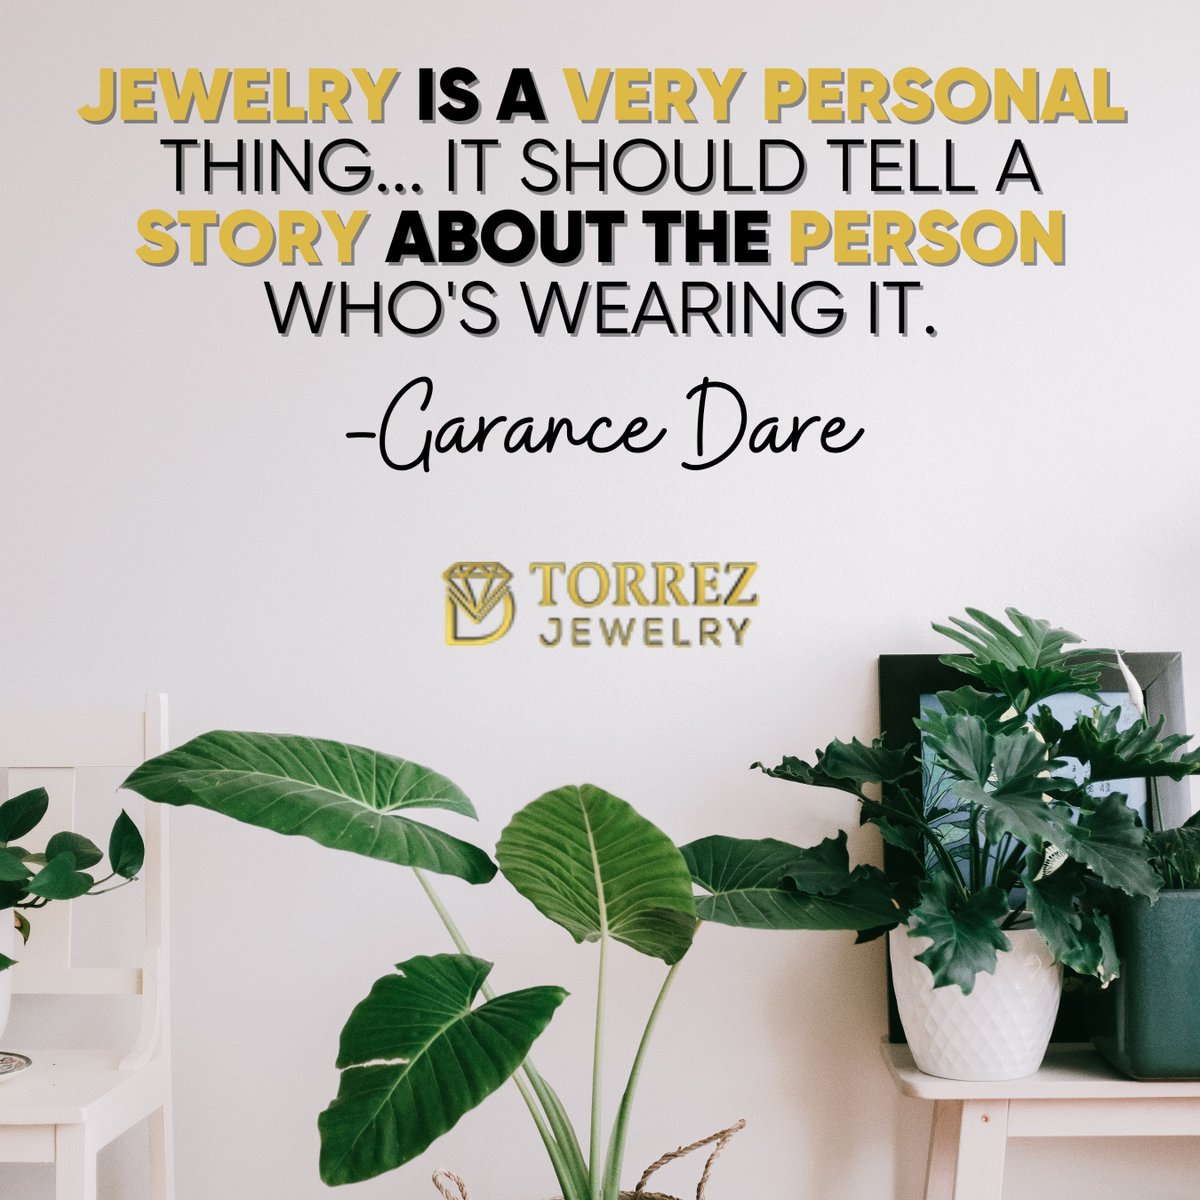 Every piece of jewelry at D Torrez Jewelry is crafted with care and intention, designed to become a cherished part of your story.

#dtorrezjewelry #craftedwithcare #cherishedmoments #heirloomjewelry #contemporarycreations #uniquenarrative #jewelrystory